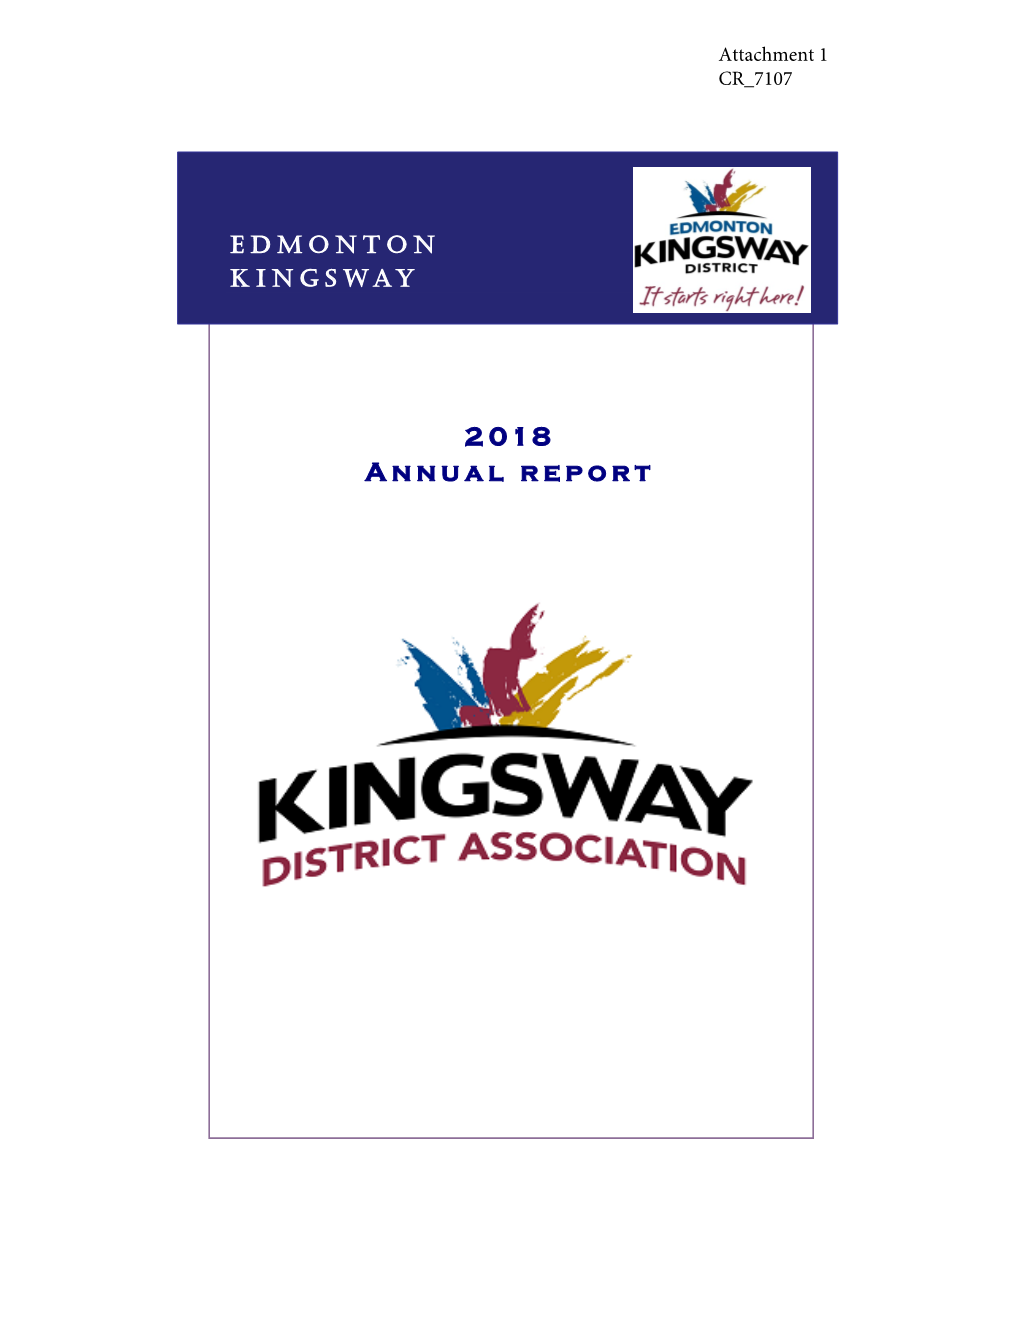 Kingsway District Association 2018 Annual Report A